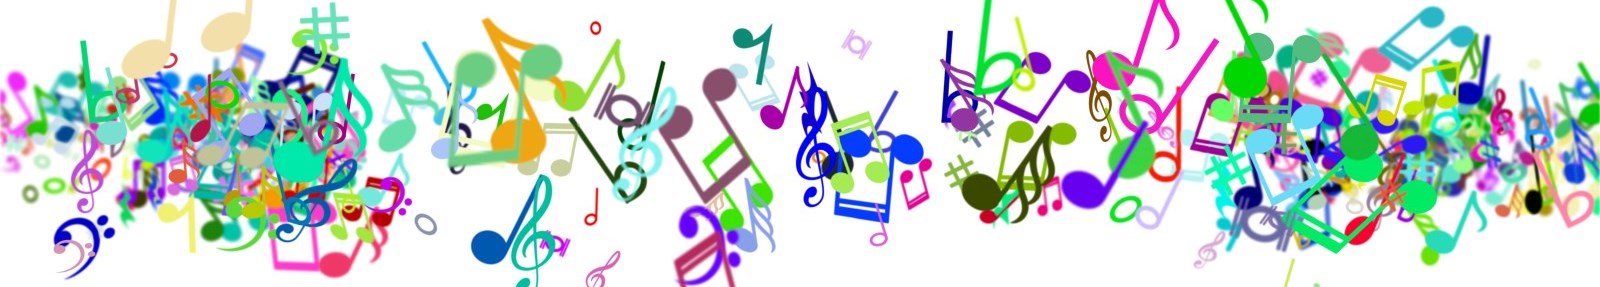 coloured musical notes on white background